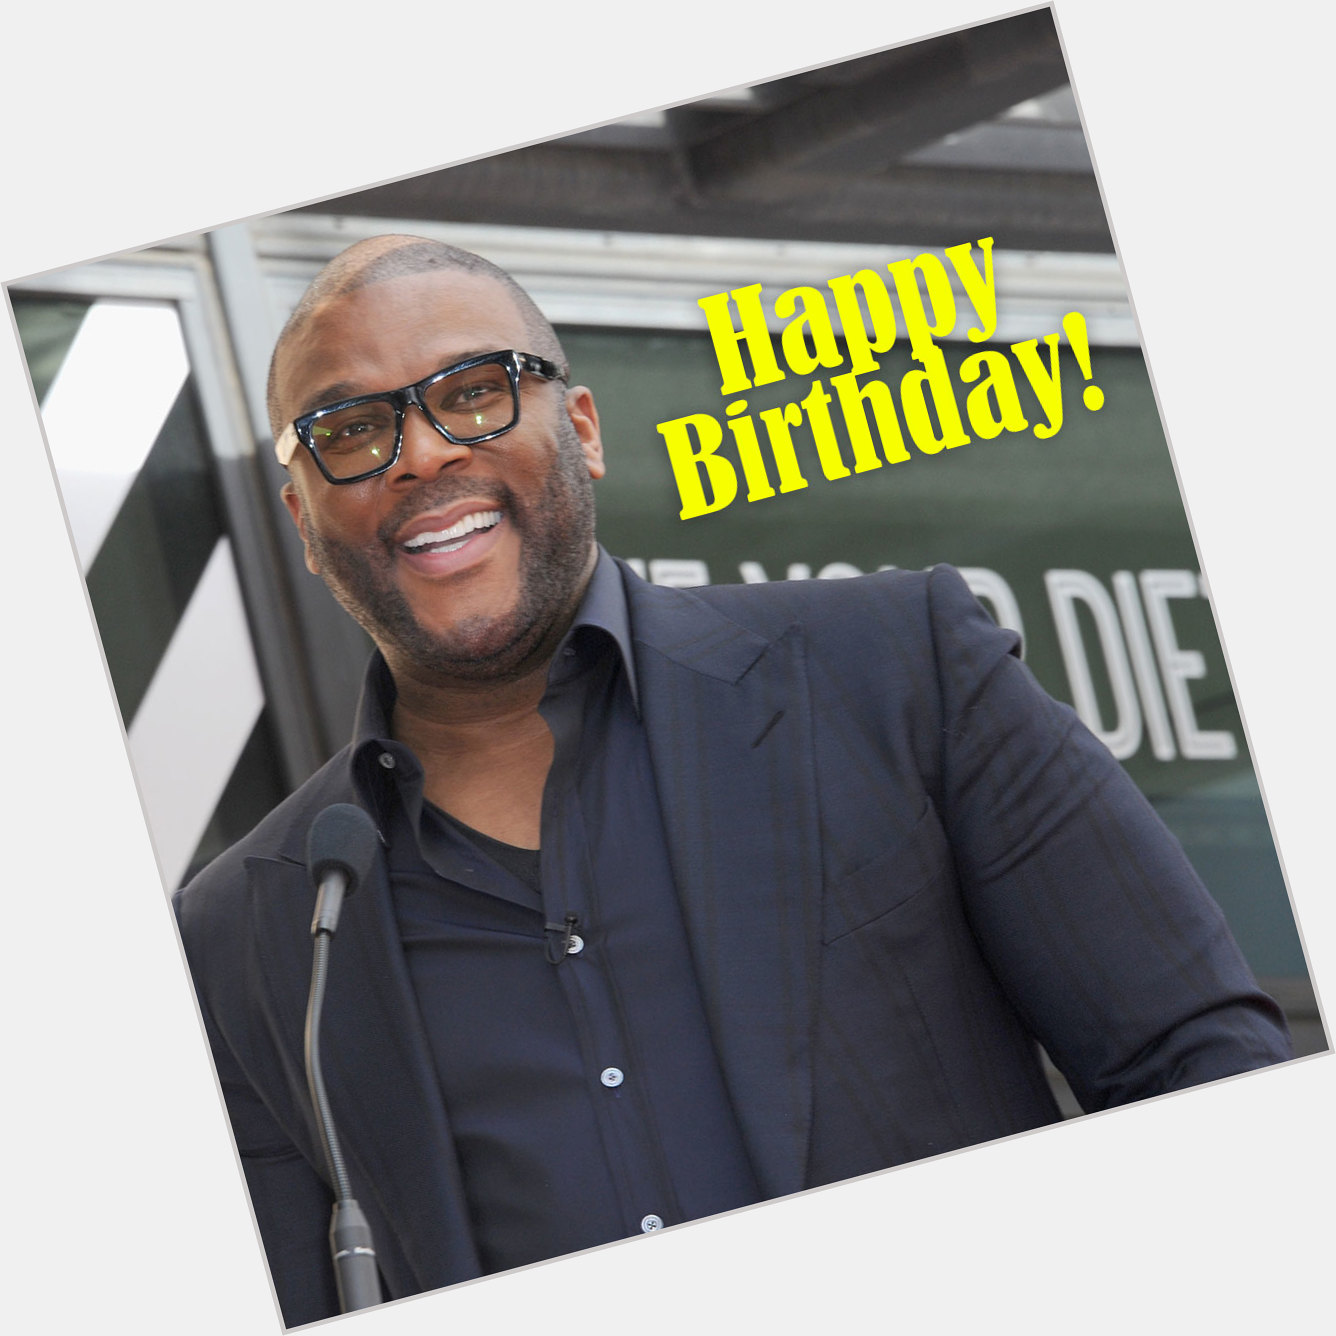 Happy birthday to Tyler Perry! The actor and filmmaker is turning 51 today. 